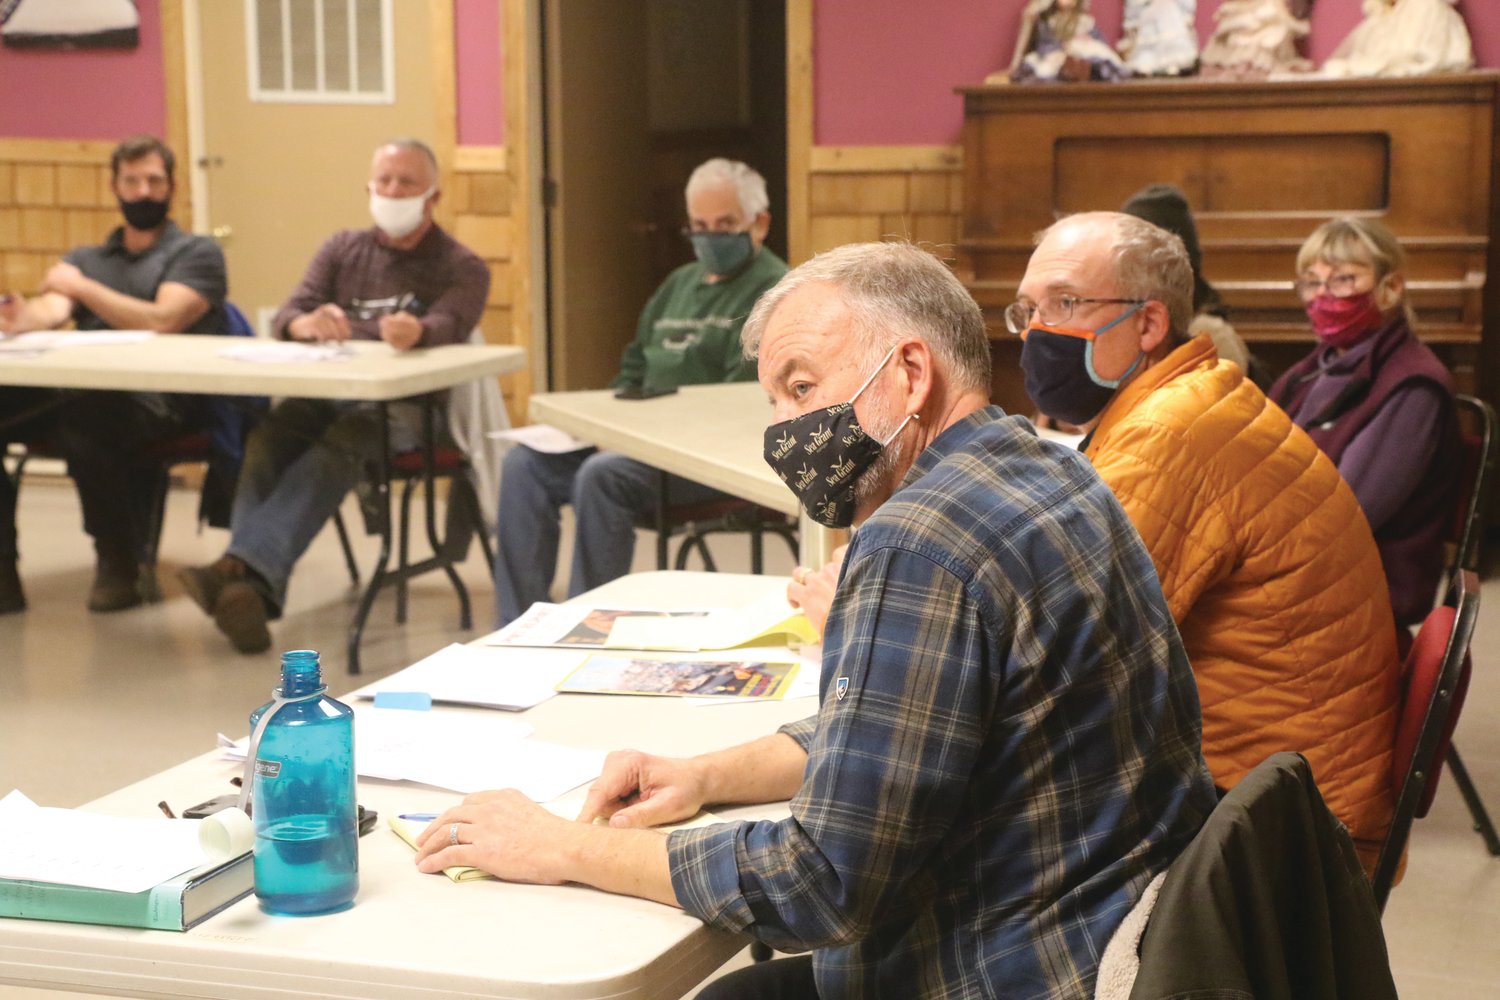 Port of Port Townsend executive director Eron Berg, (in orange) and Port deputy director Eric Toews led a two-hour open community meeting in Quilcene last week to hear the local community’s concerns surrounding Herb Beck Marina.